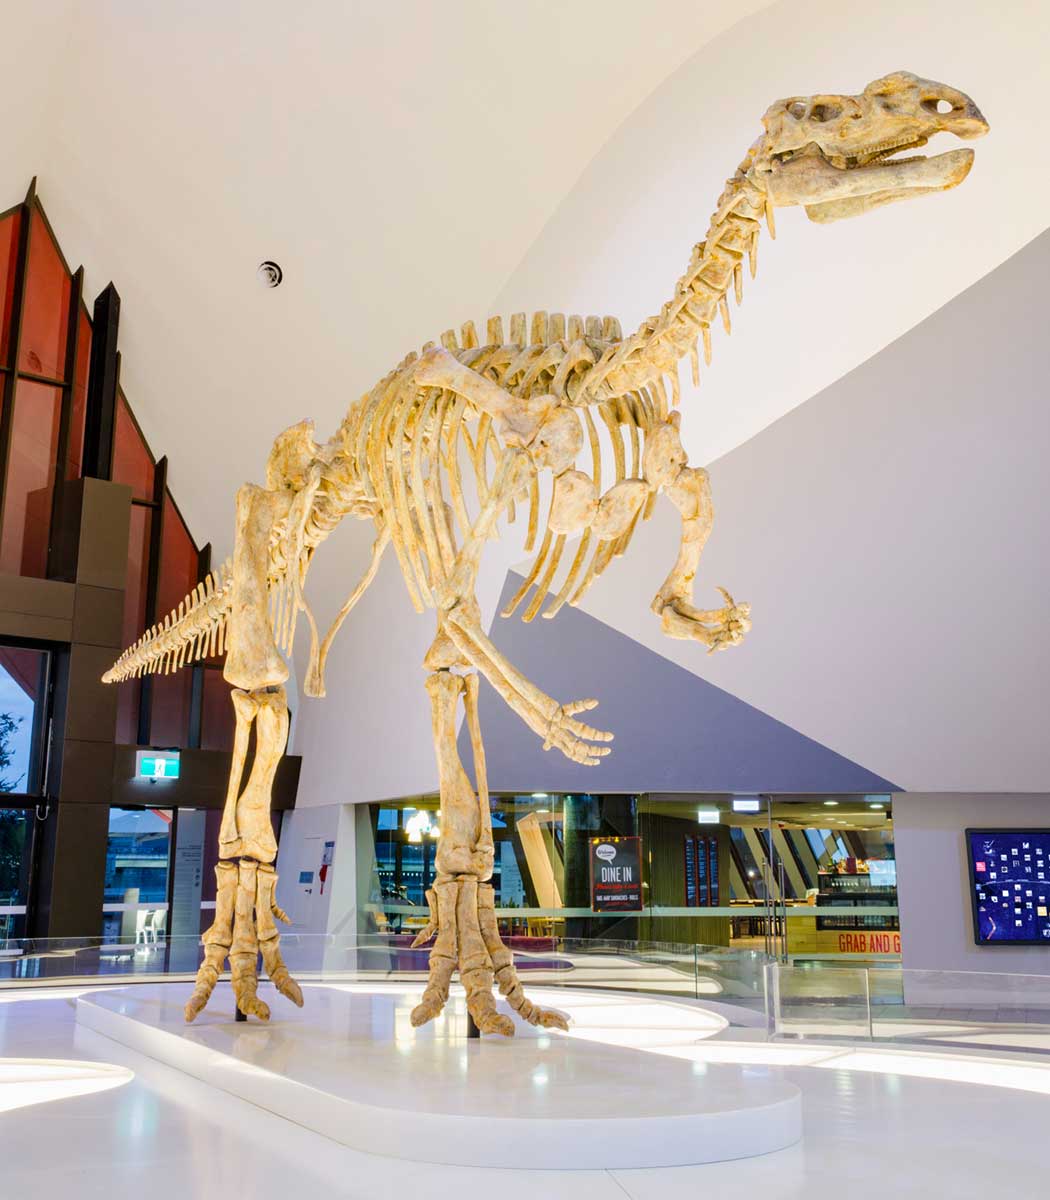 Model of a large dinosaur skeleton on display in the Atrium of the National Museum of Australia. - click to view larger image